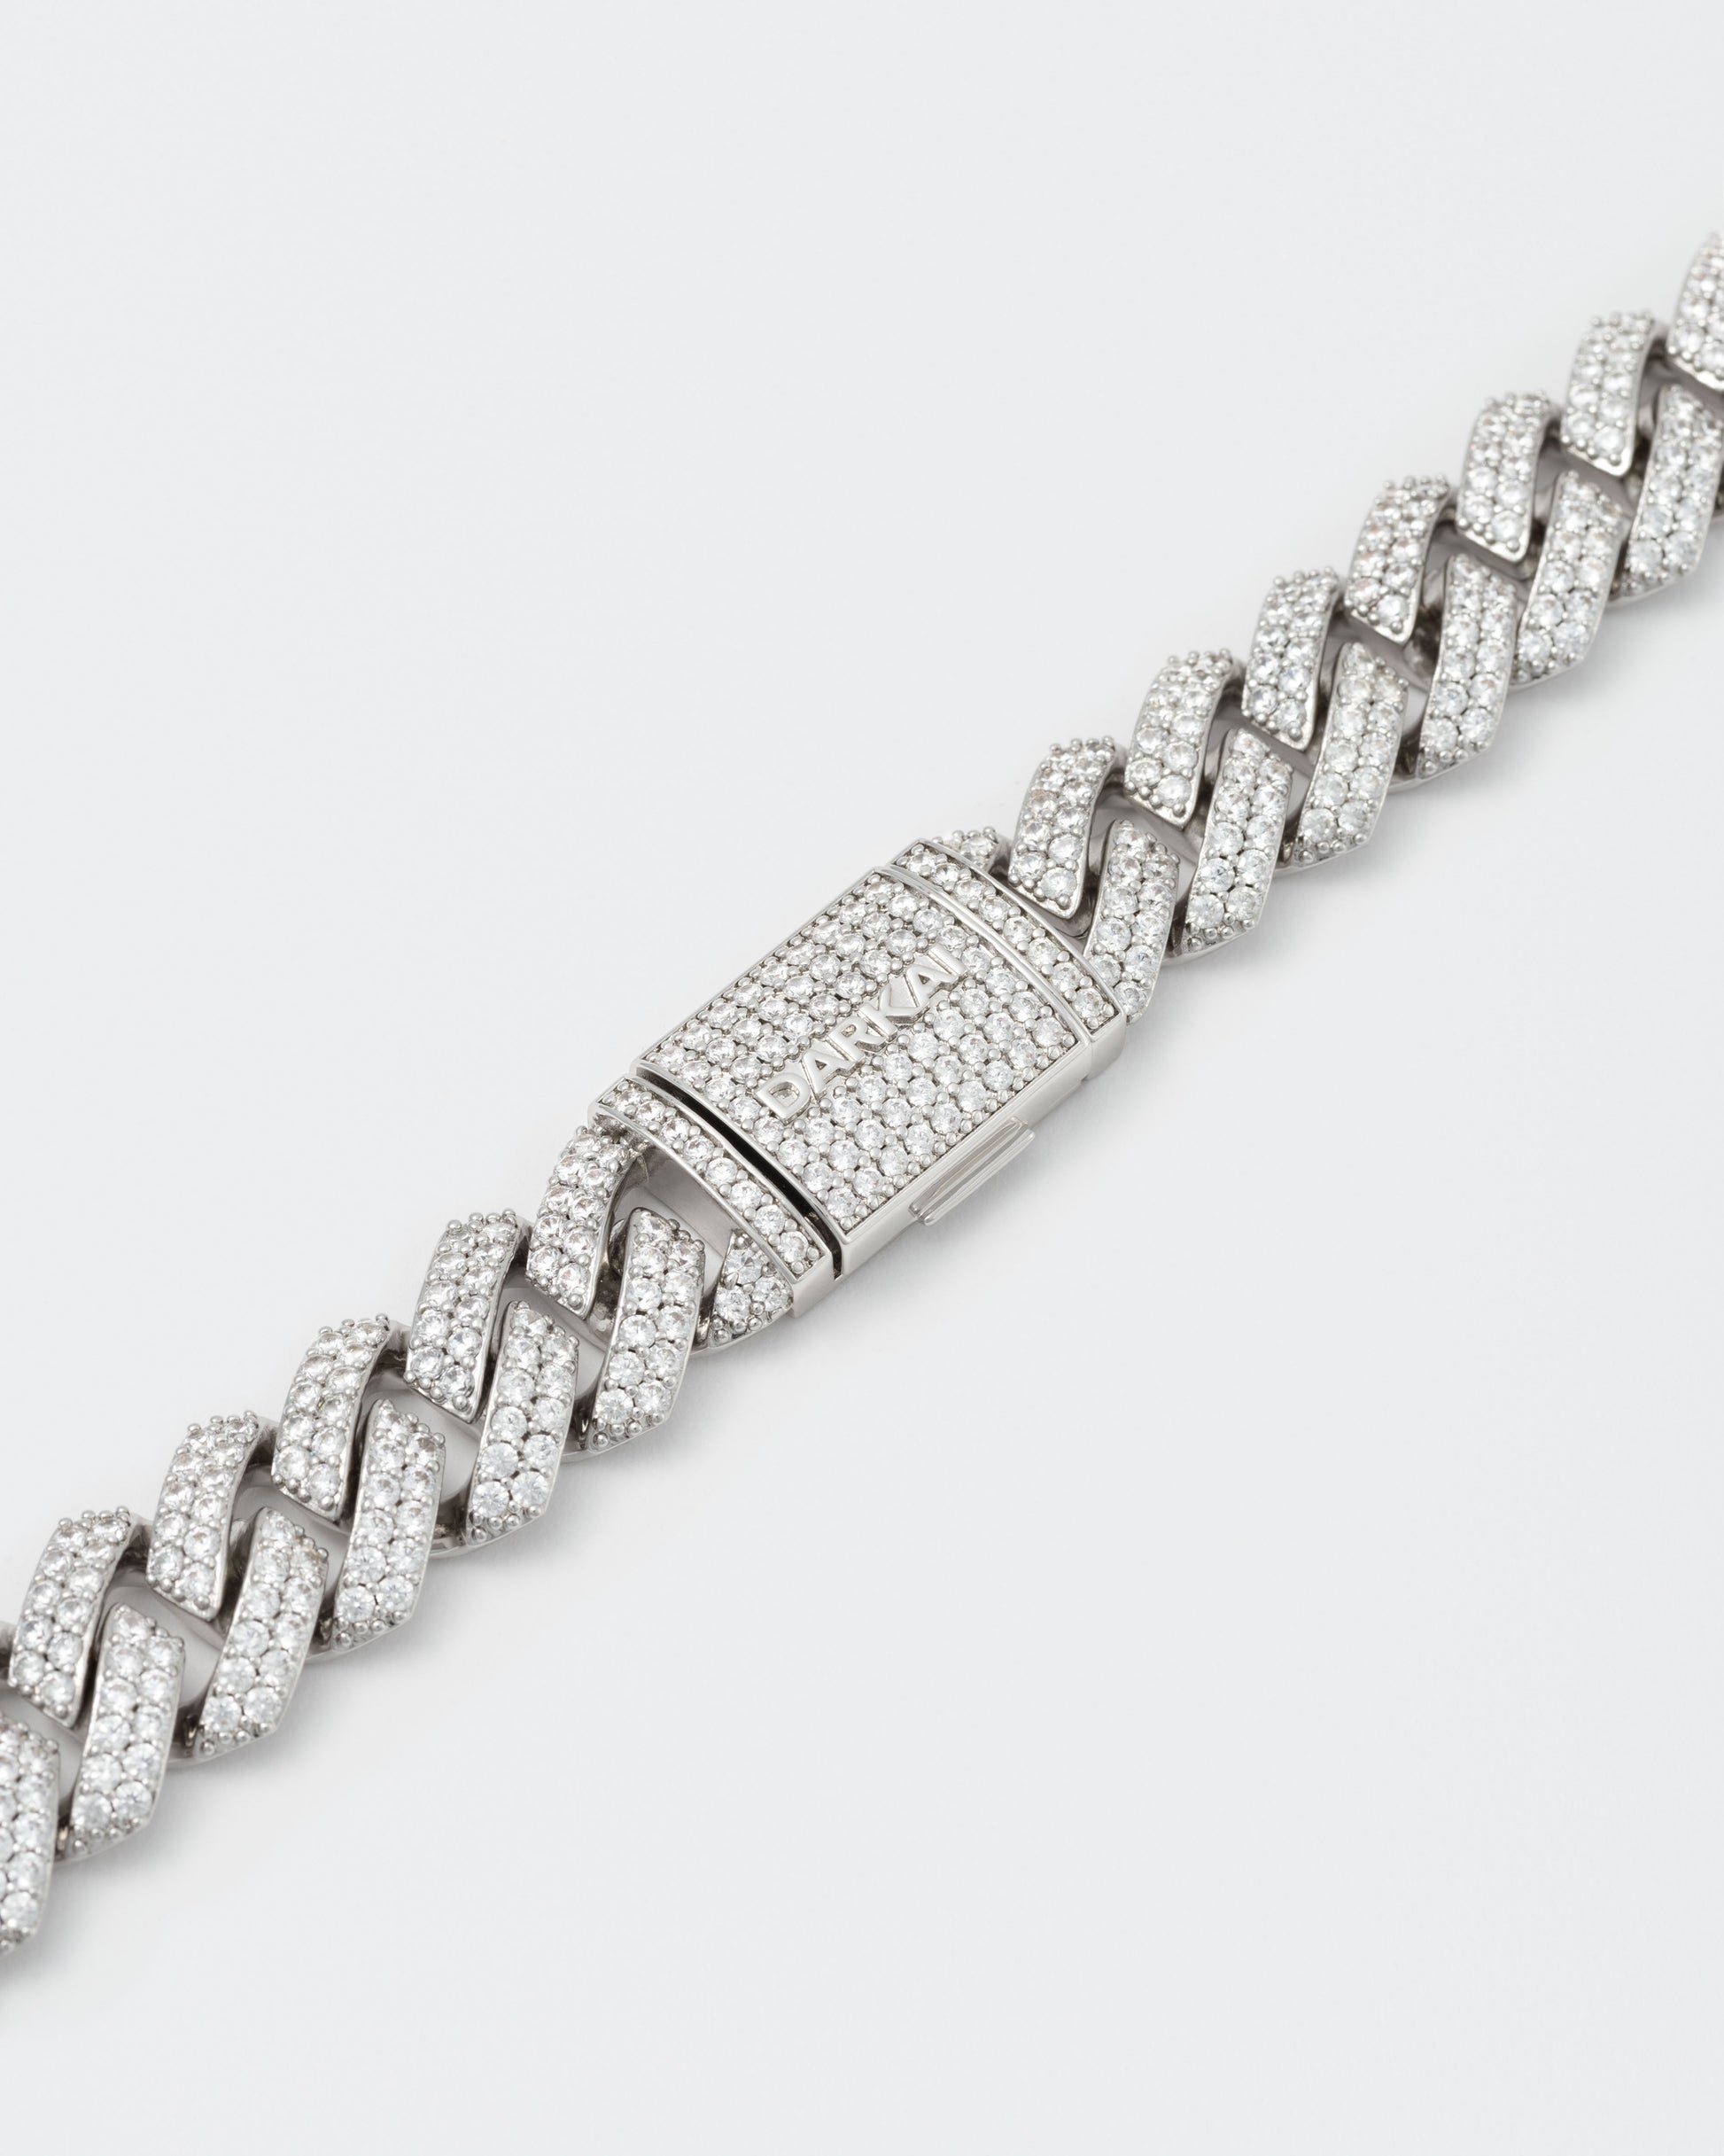 detail of the bracelet clasp with hand-set micropavé stones in white